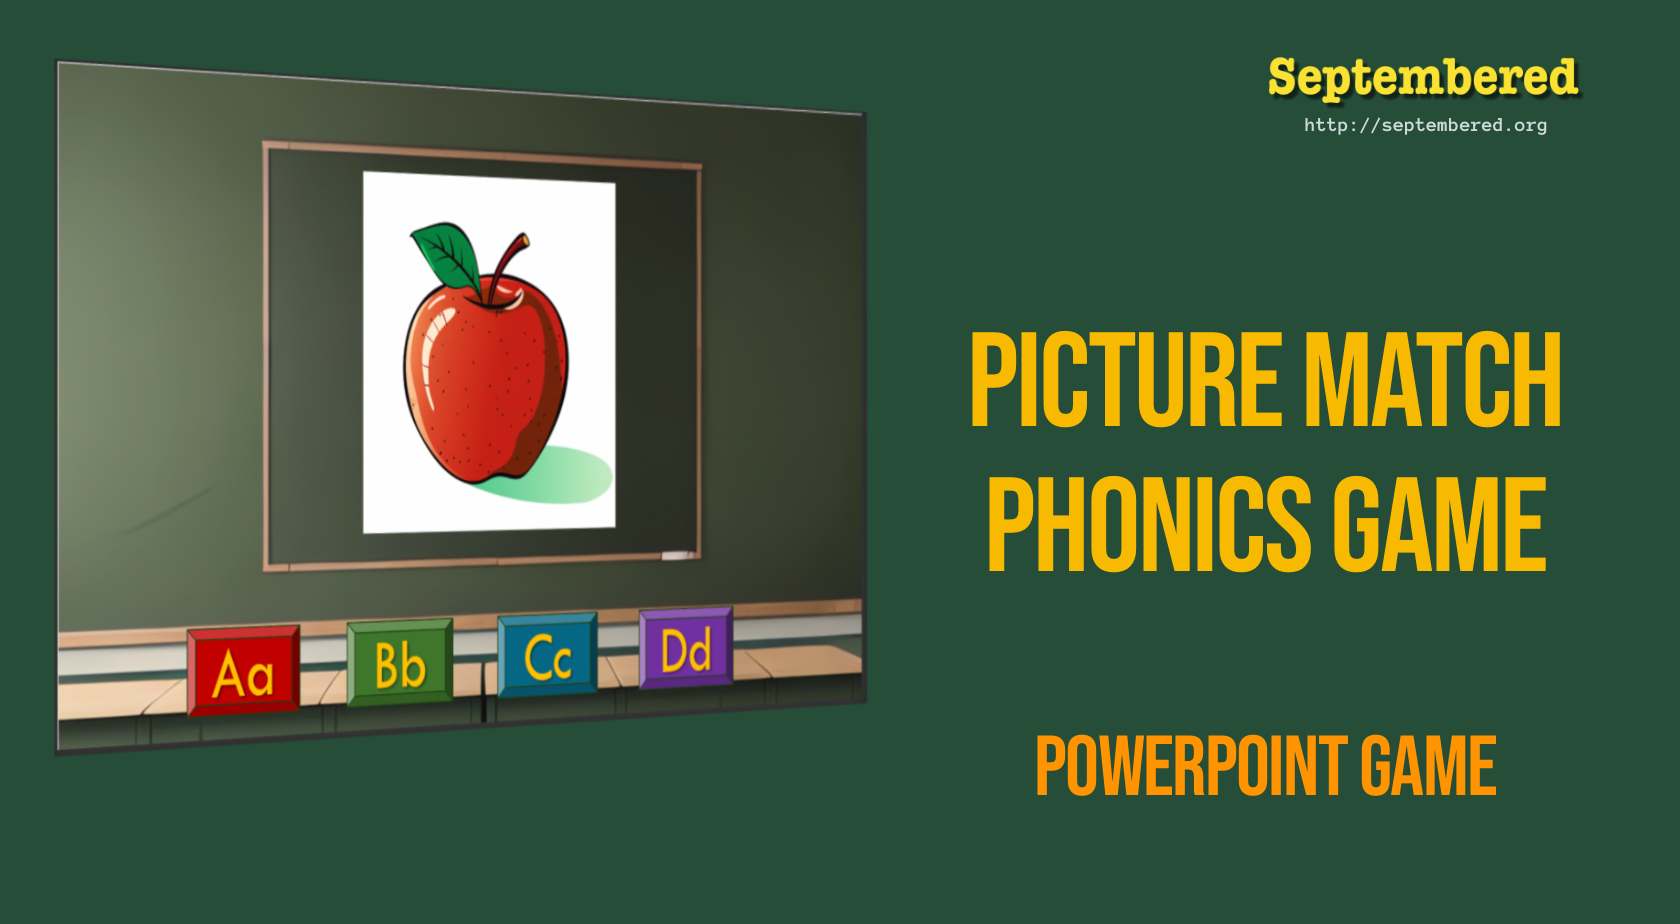 Slanted view of a presentation slide with an apple image at the center, four colorful buttons labeled Aa, Bb, Cc, Dd, and the title "Picture Match Phonics Game" with a subheading "PowerPoint Game" on the right.